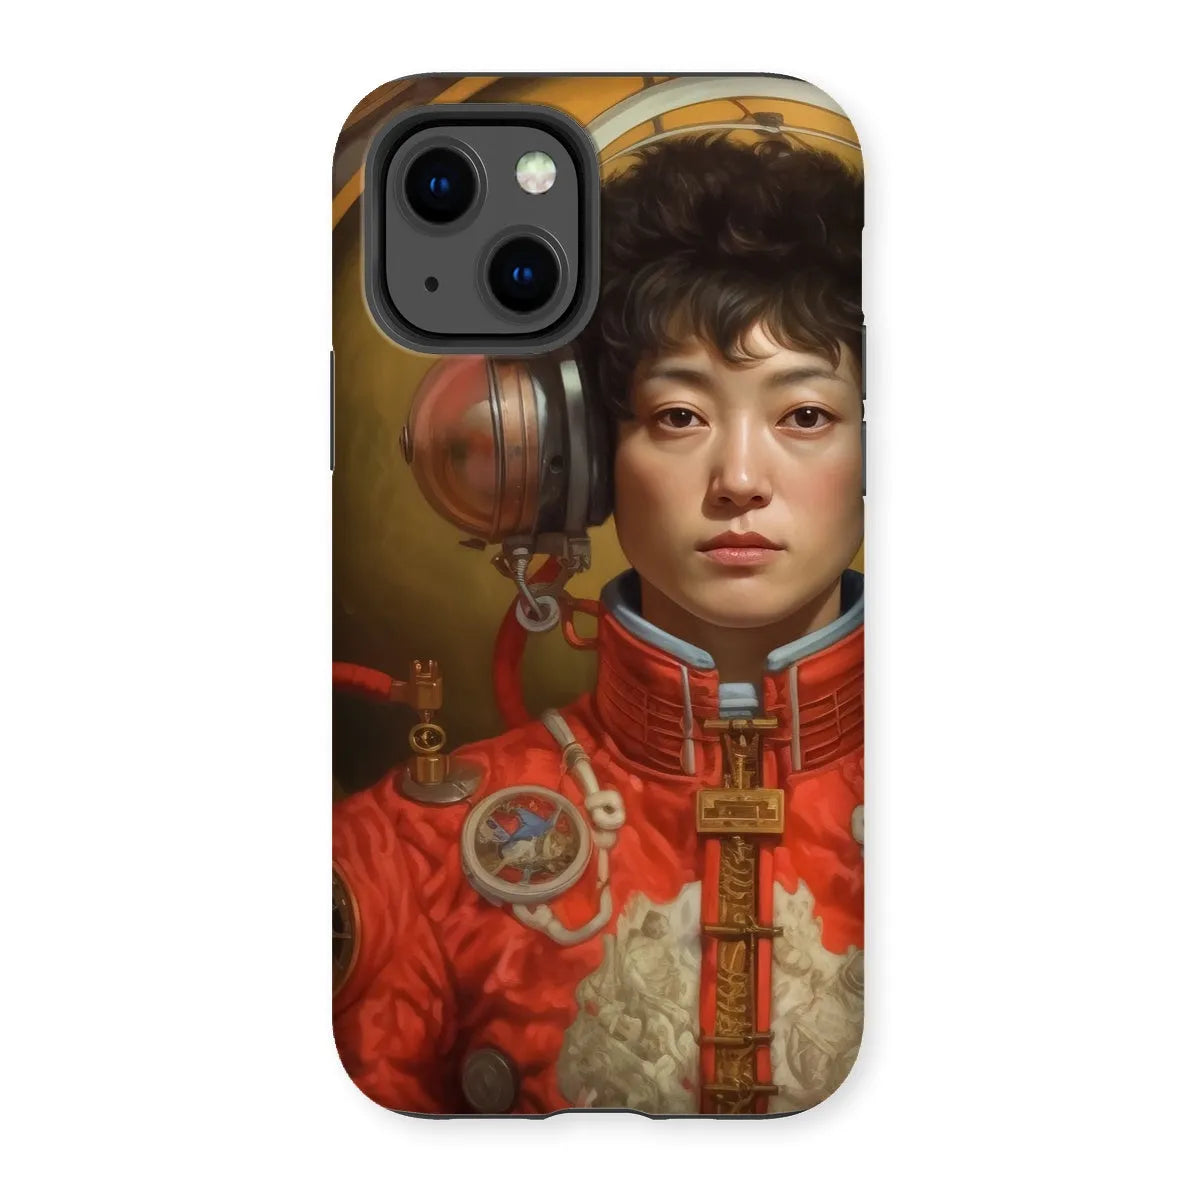 Mùchén - Gay Chinese Astronaut Aesthetic Phone Case - Iphone 13 / Matte - Mobile Phone Cases - Aesthetic Art